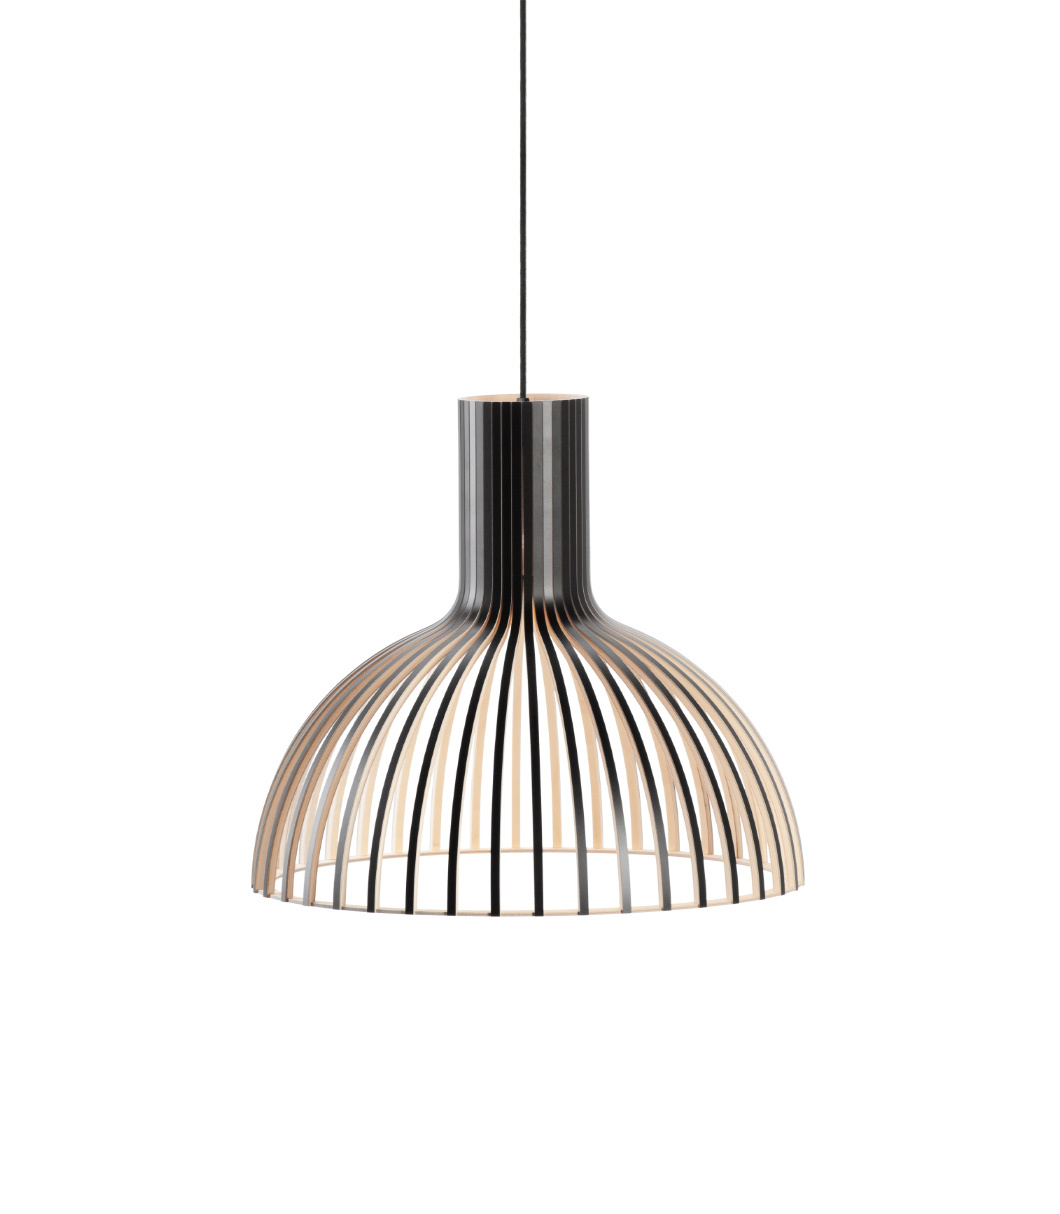 Victo Small 4251 pendant lamp  is available in black laminated